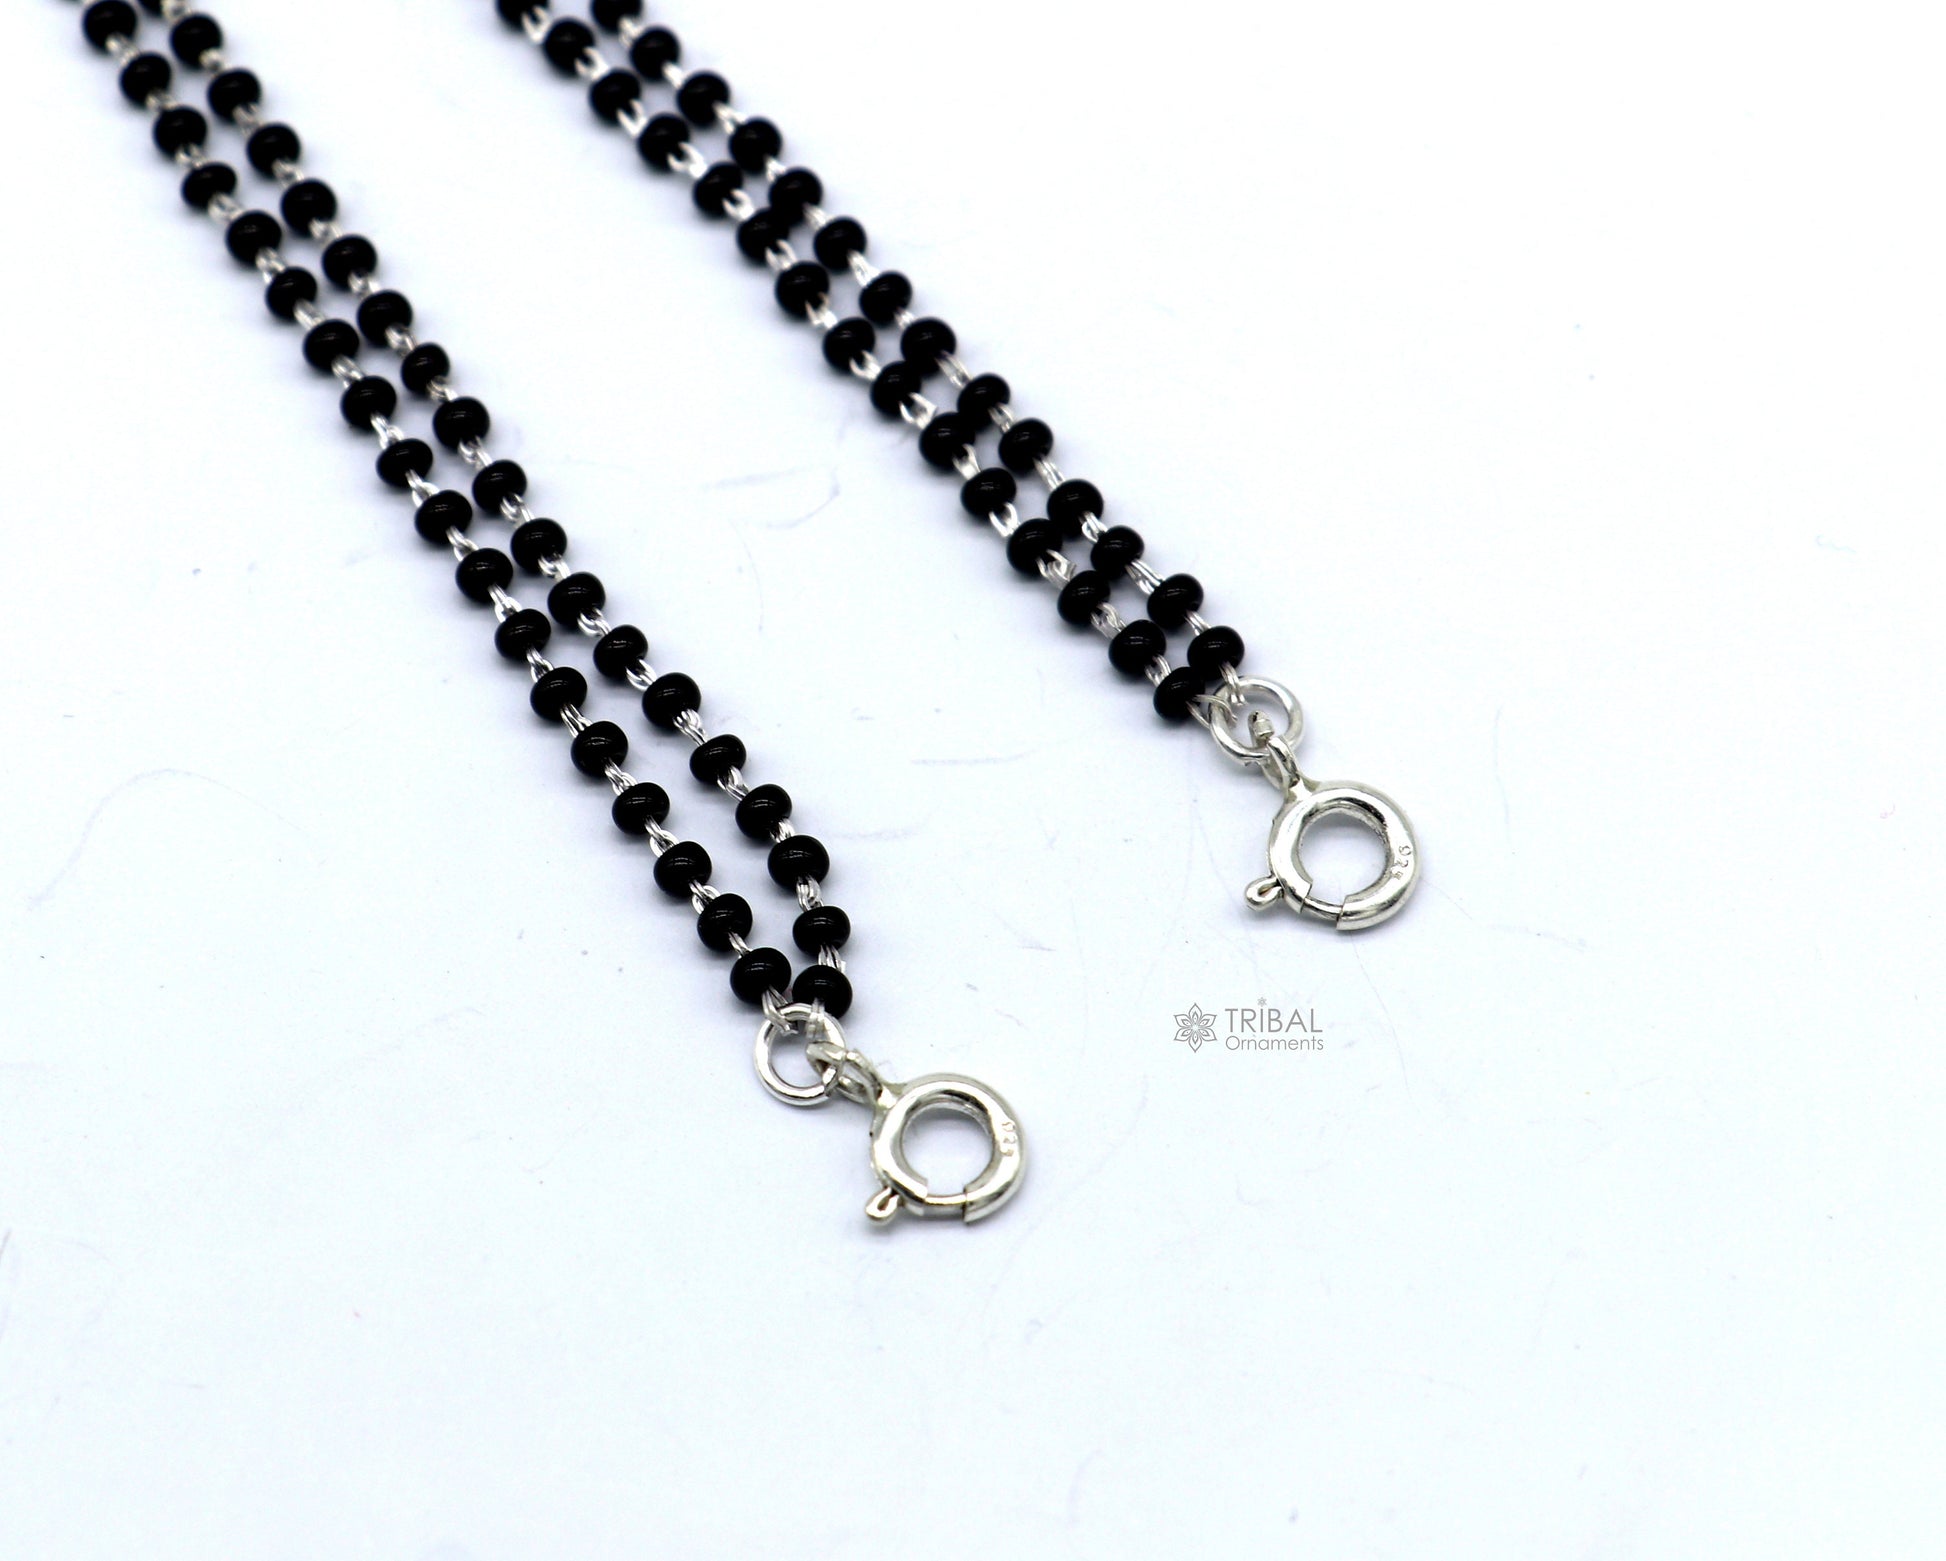 925 sterling silver 2.2mm black beads 2 line chain, vintage Cultural fancy necklace, traditional style brides Mangalsutra chain India ch555 - TRIBAL ORNAMENTS